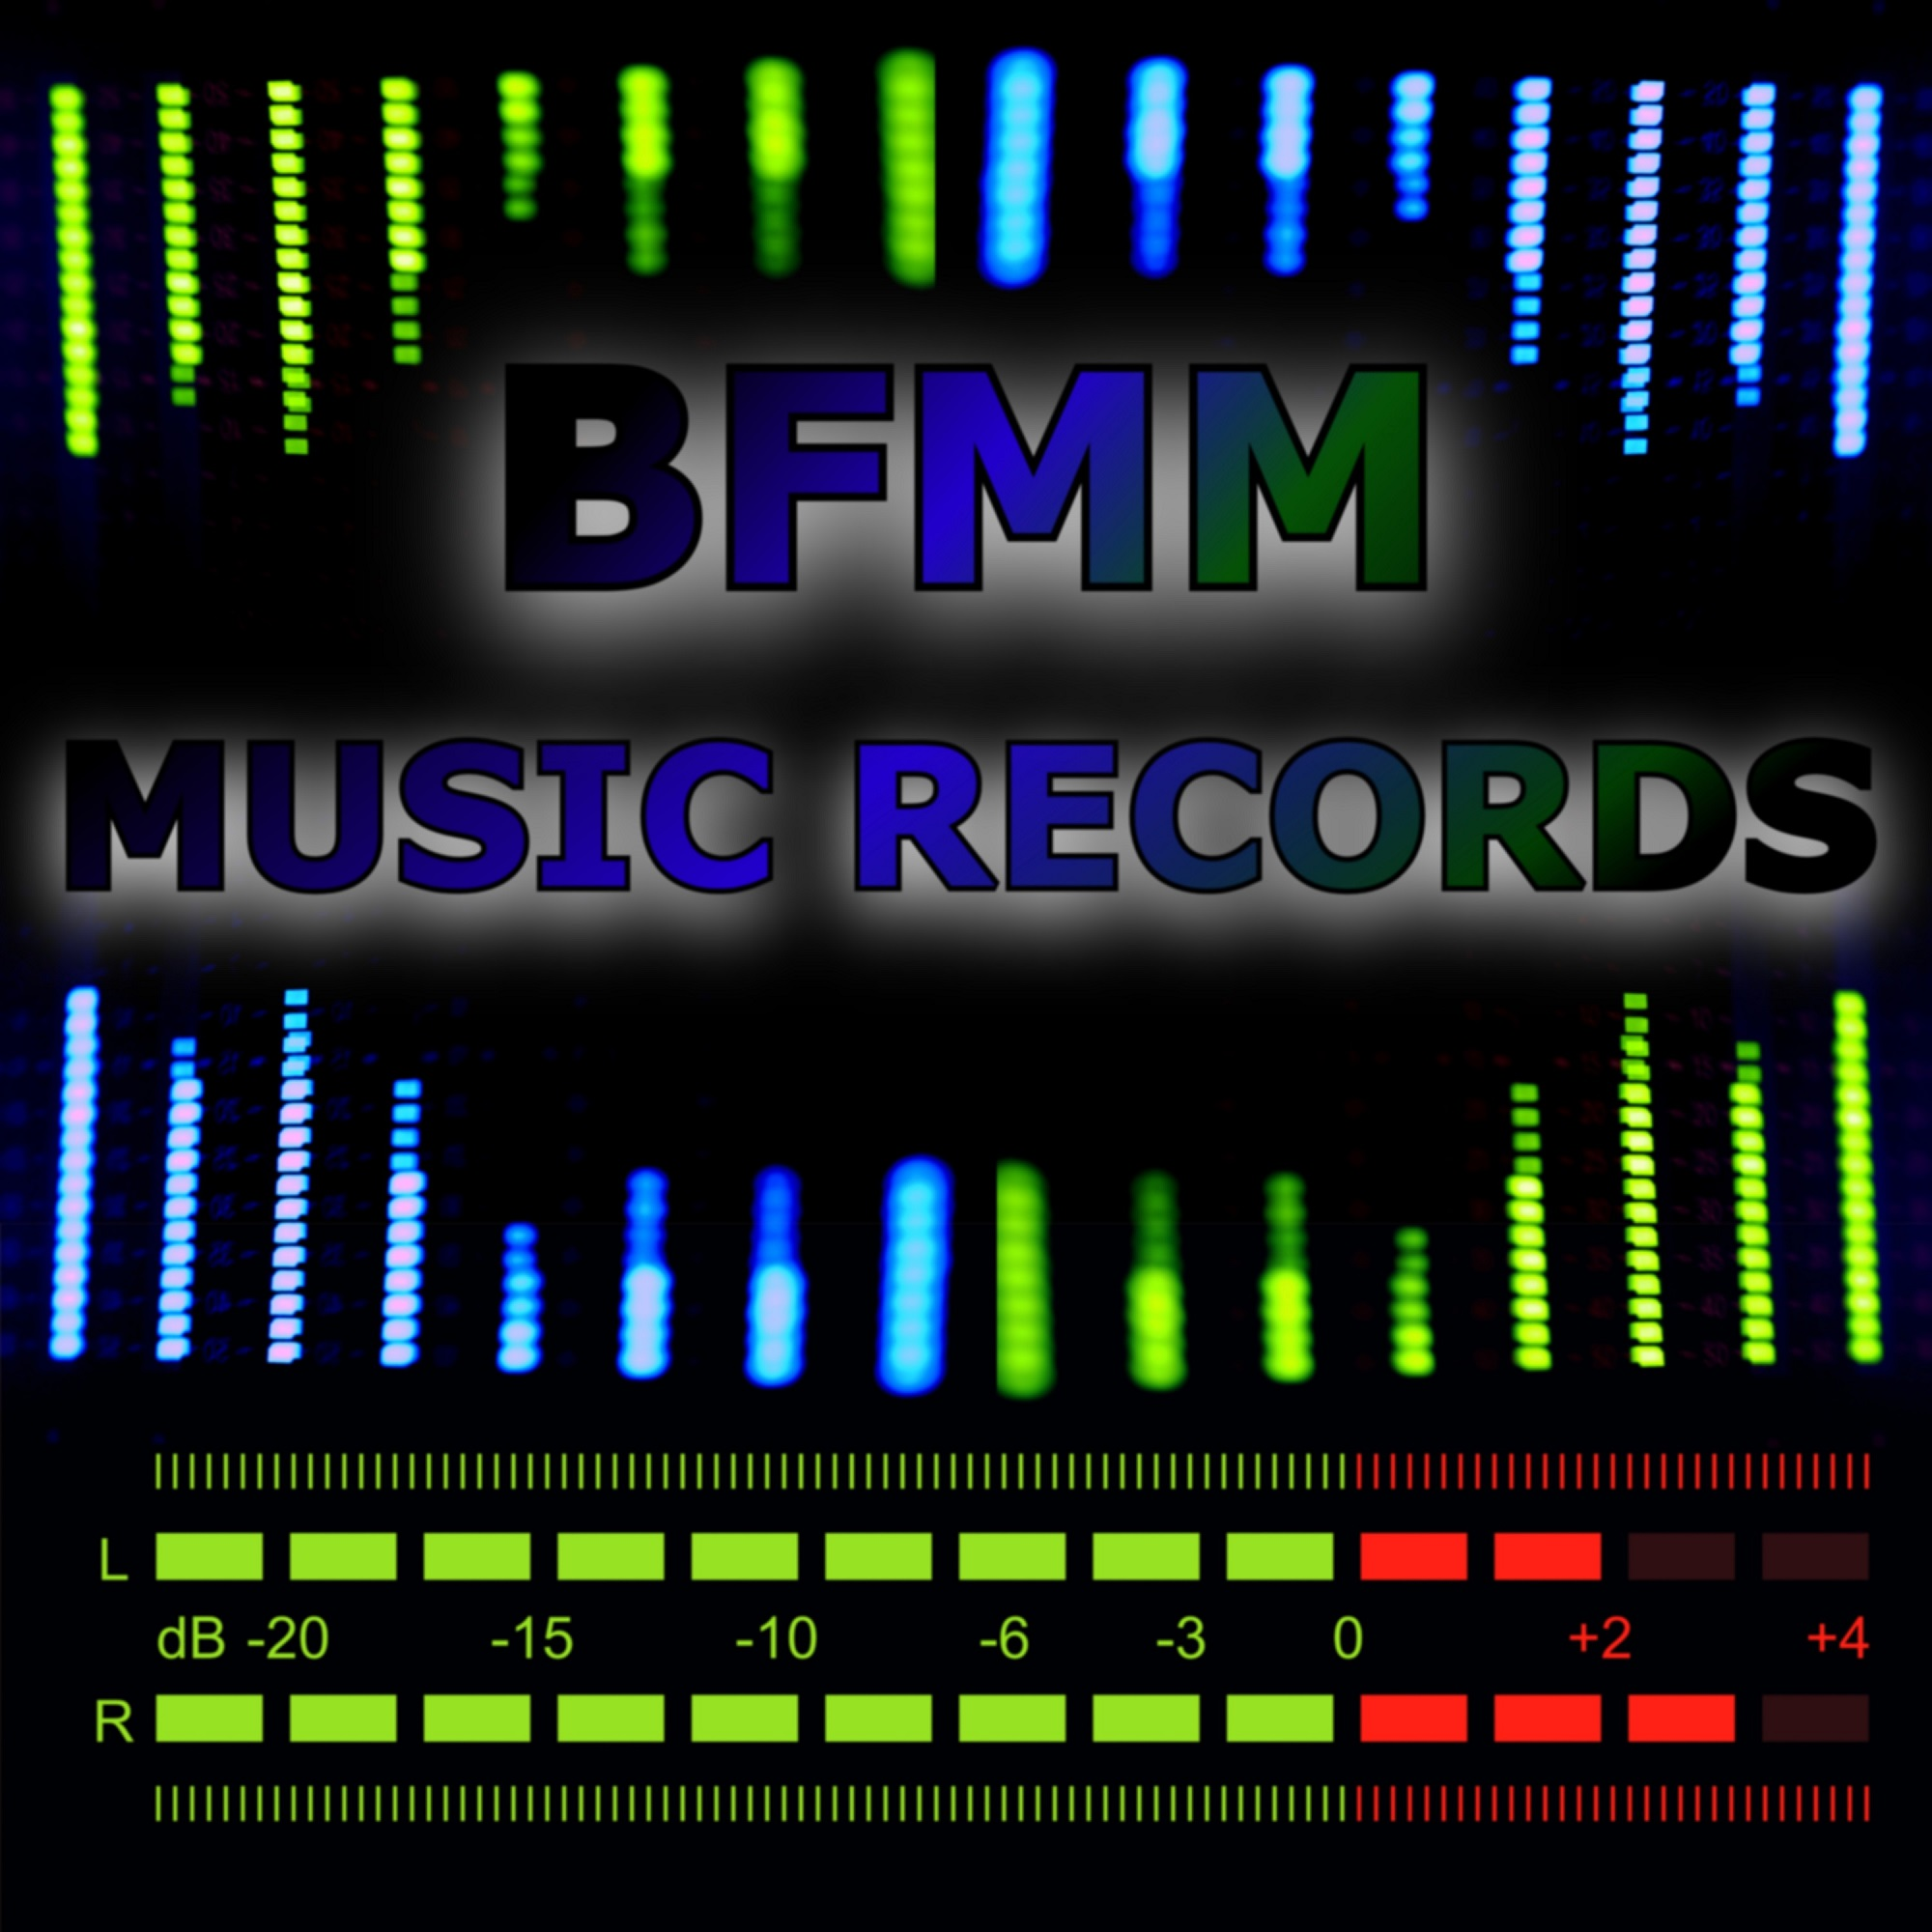 [Deep] Techno, Downtempo, House Station [BFMM MUSIC RECORDS]